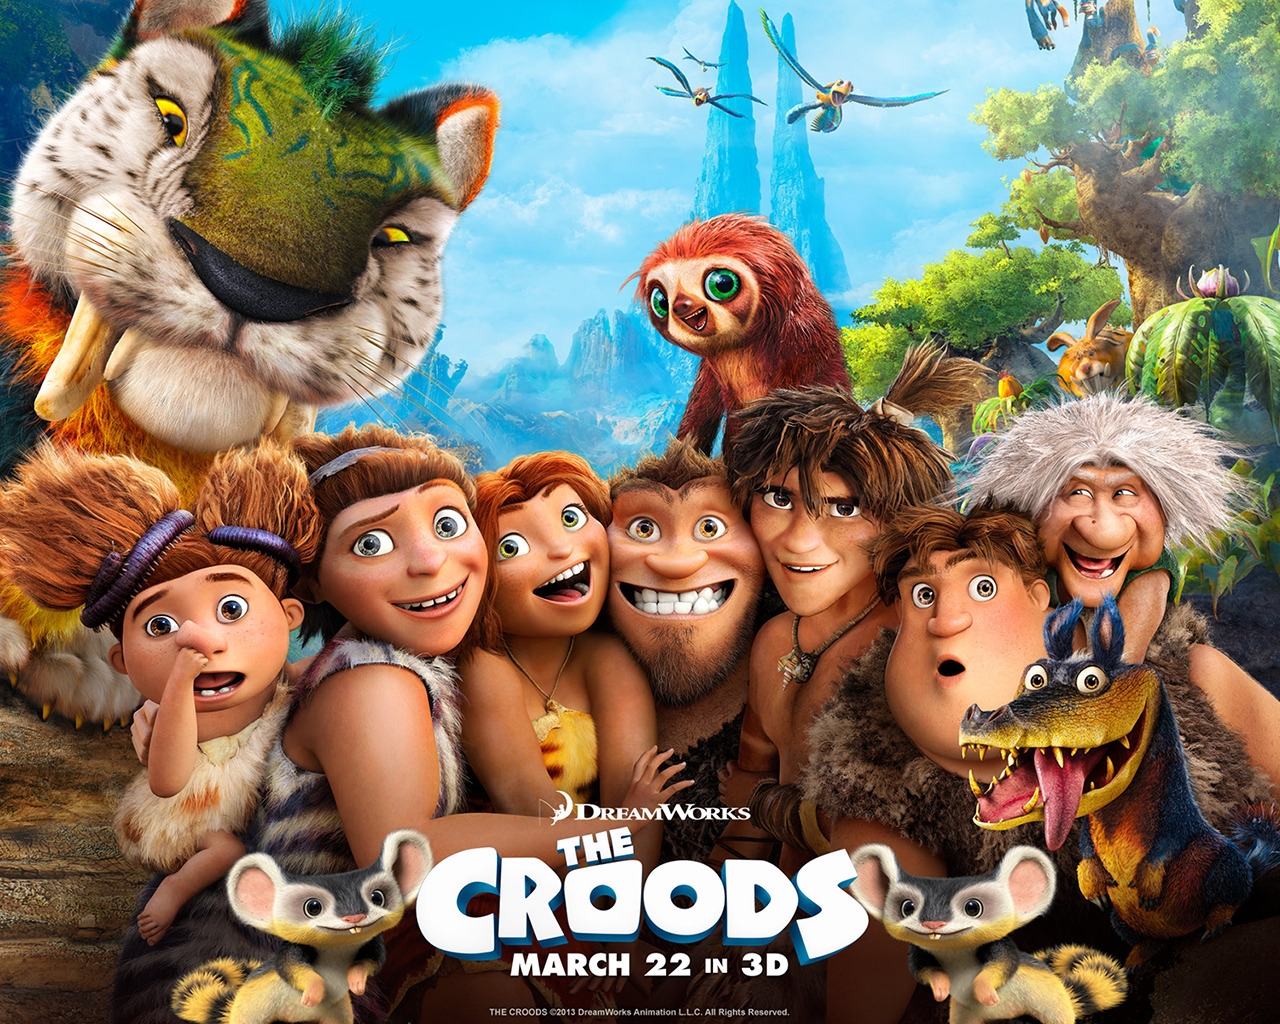 The Croods for 1280 x 1024 resolution